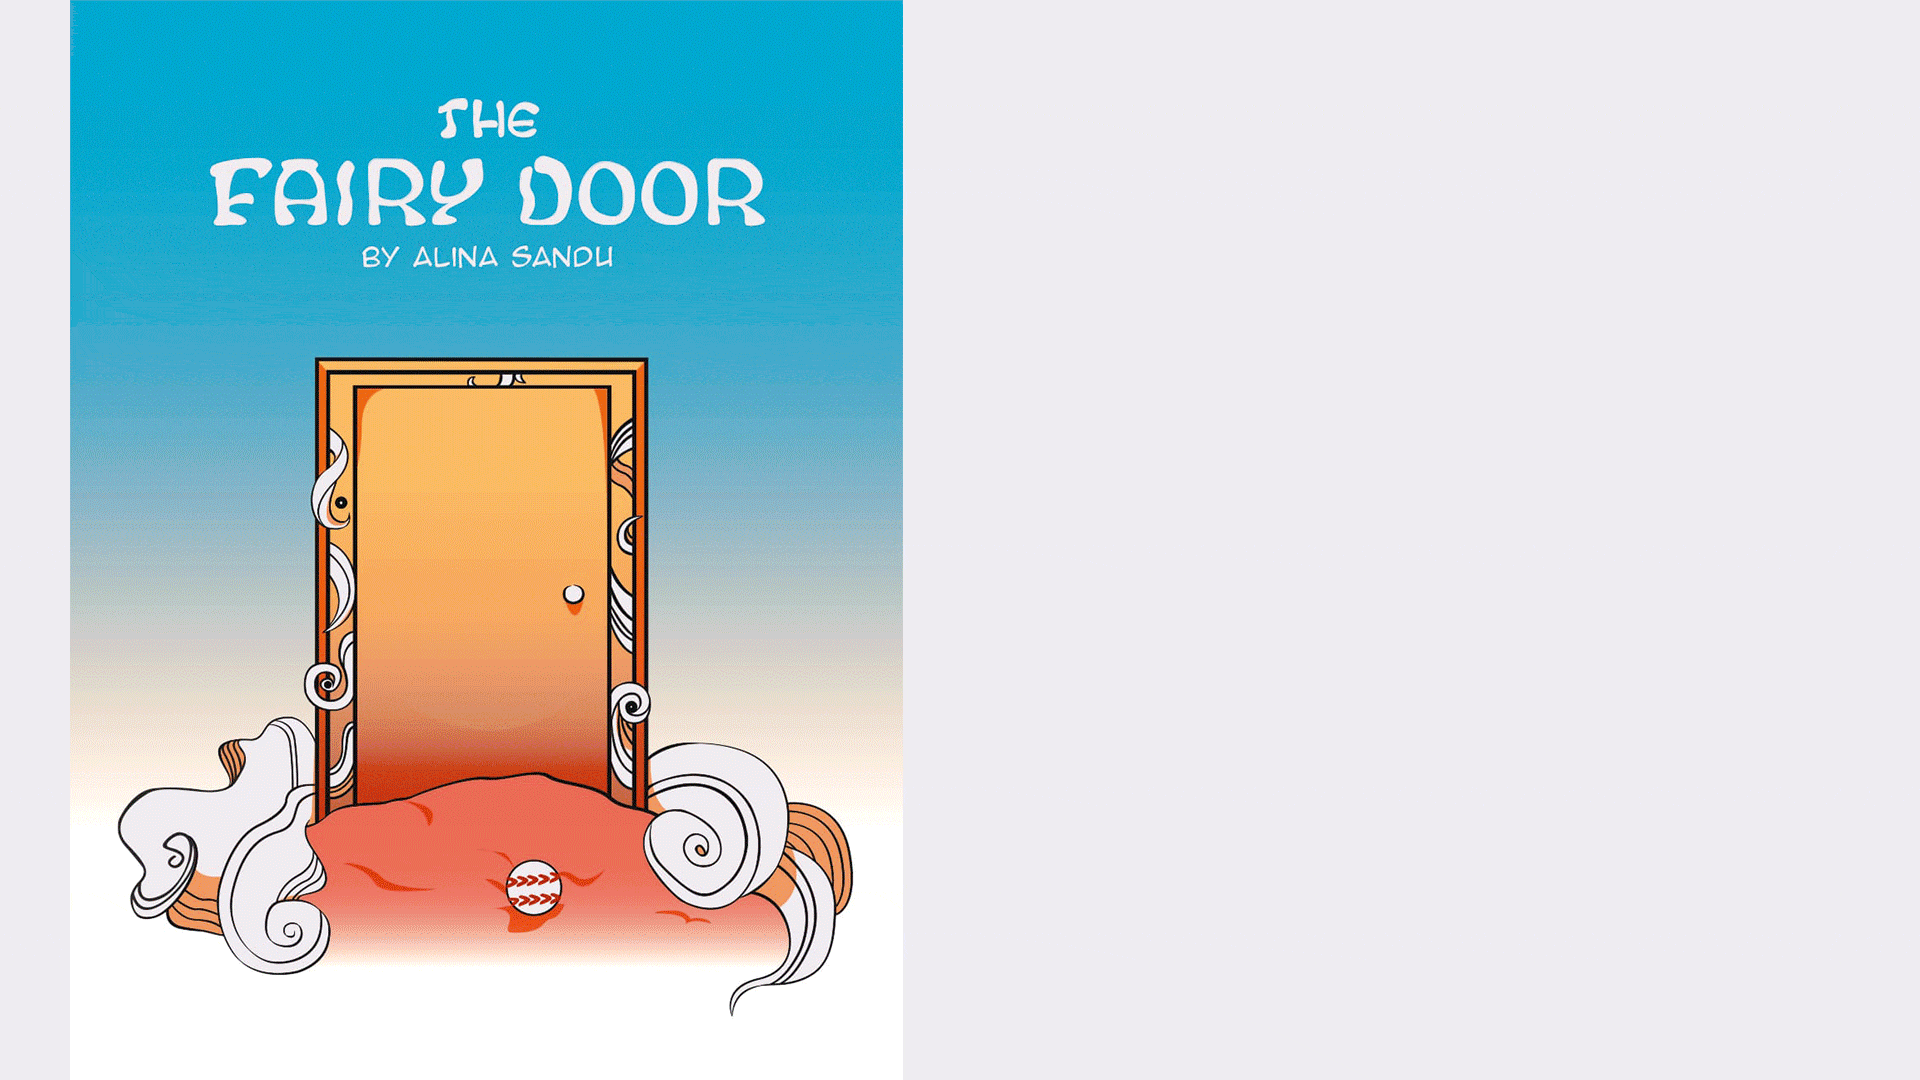 A webcomic called “The Fairy Door” presented by a series of 4 panel strips that tell the unlikely friendship between a boy and a fairy.